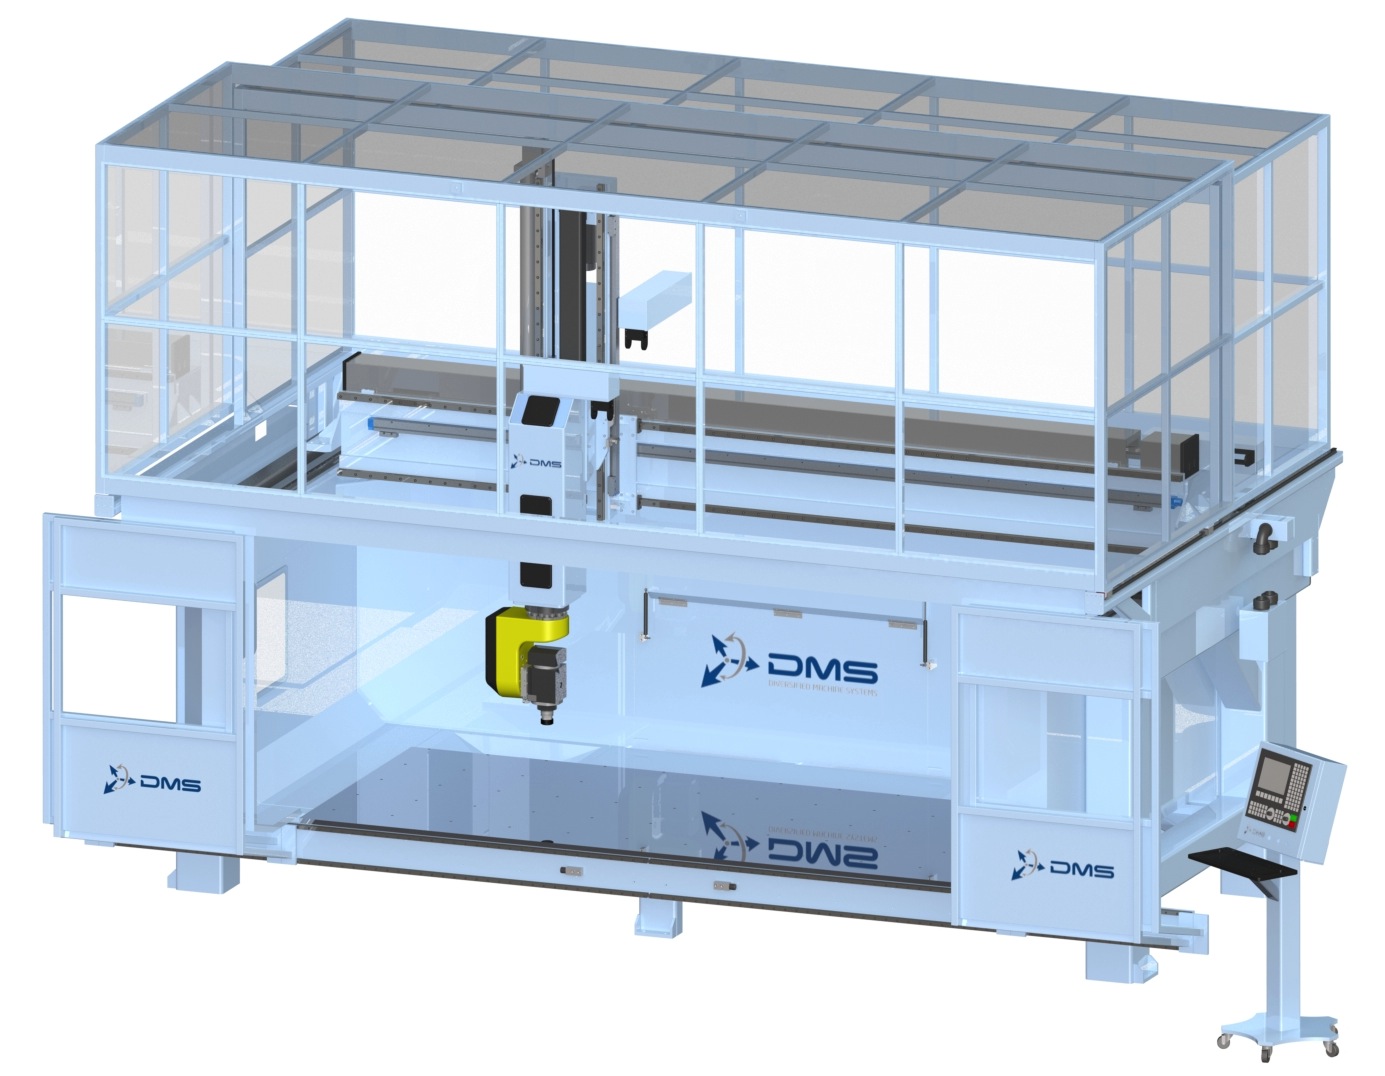 DMS CNC Routers - Enclosed 5 Axis Euro 5 CNC Router - As Featured at EMO Hannover 2013